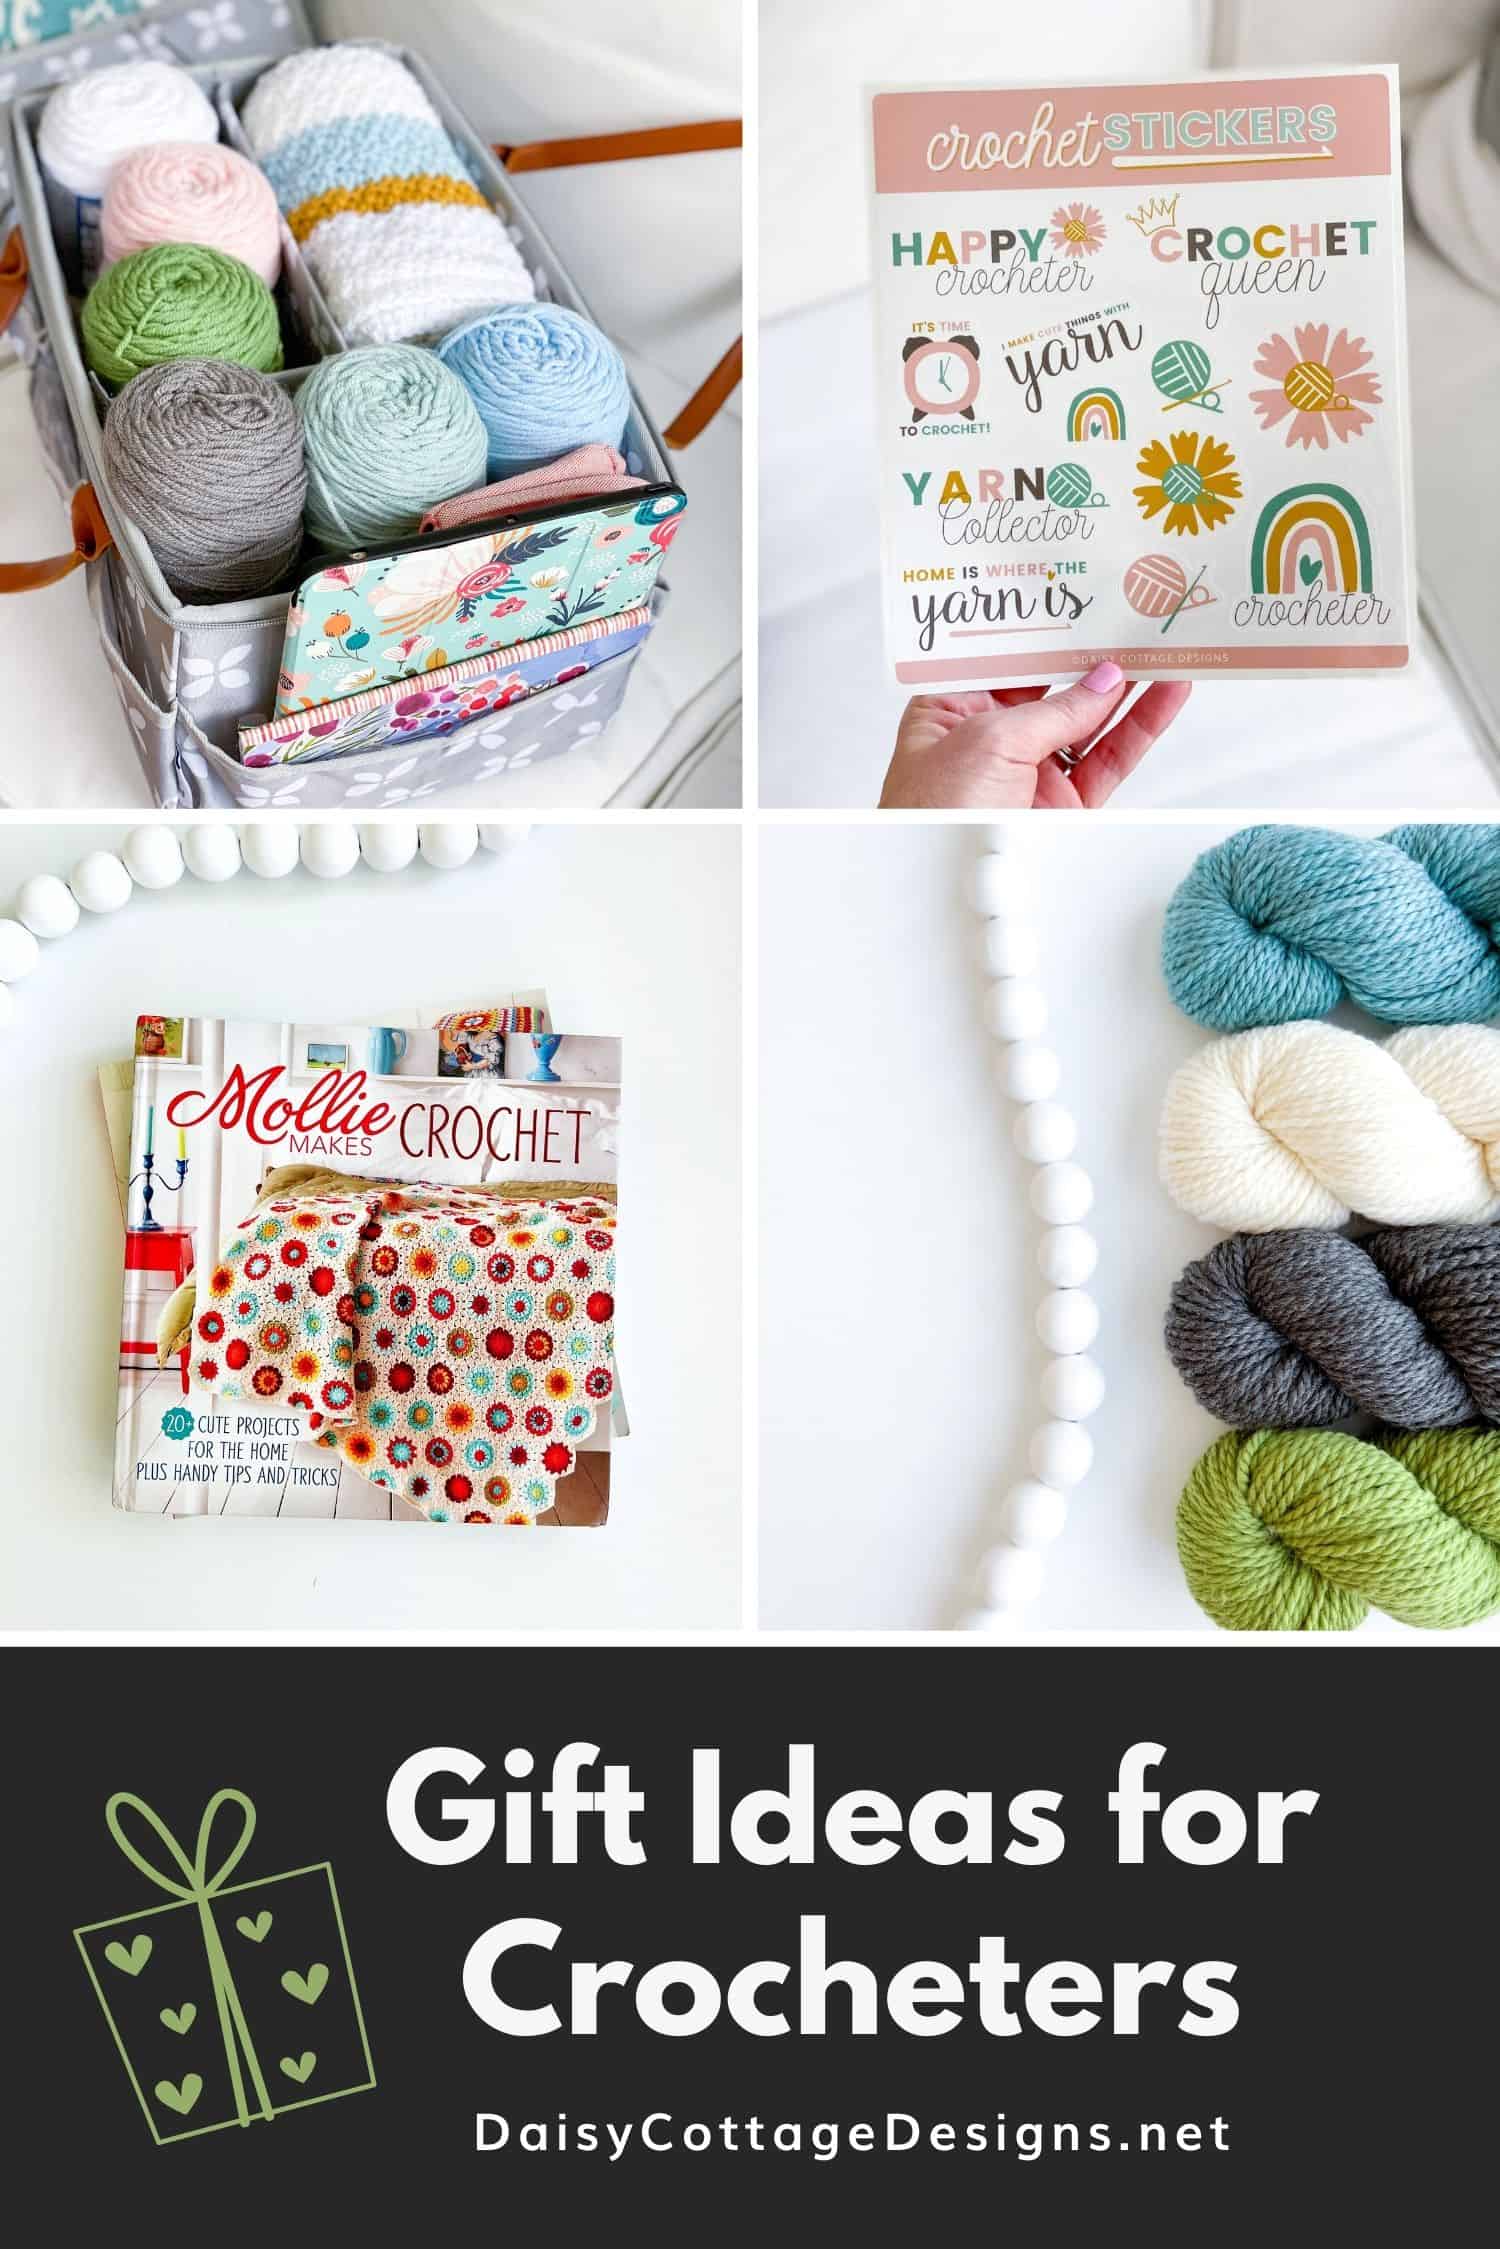 Crochet is more than just a craft. It's a hobby, a lifestyle, and a way to express creativity. Crocheters love to receive crochet-themed gifts for their birthdays, anniversaries, and other occasions.